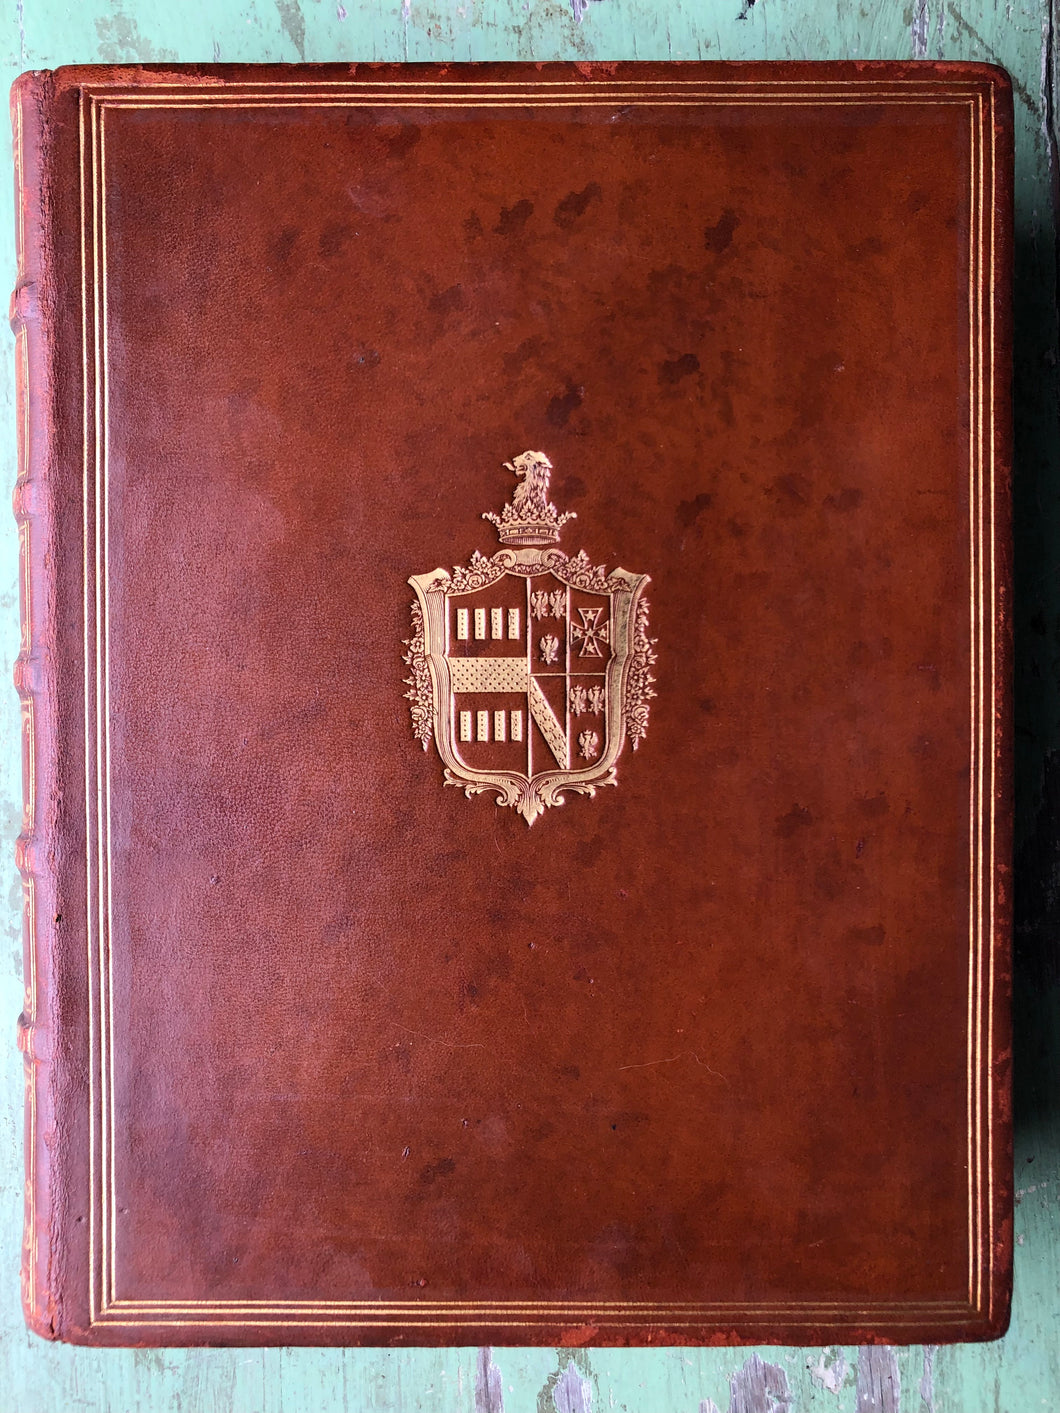 Memoirs of Count Grammont, by Count A. Hamilton